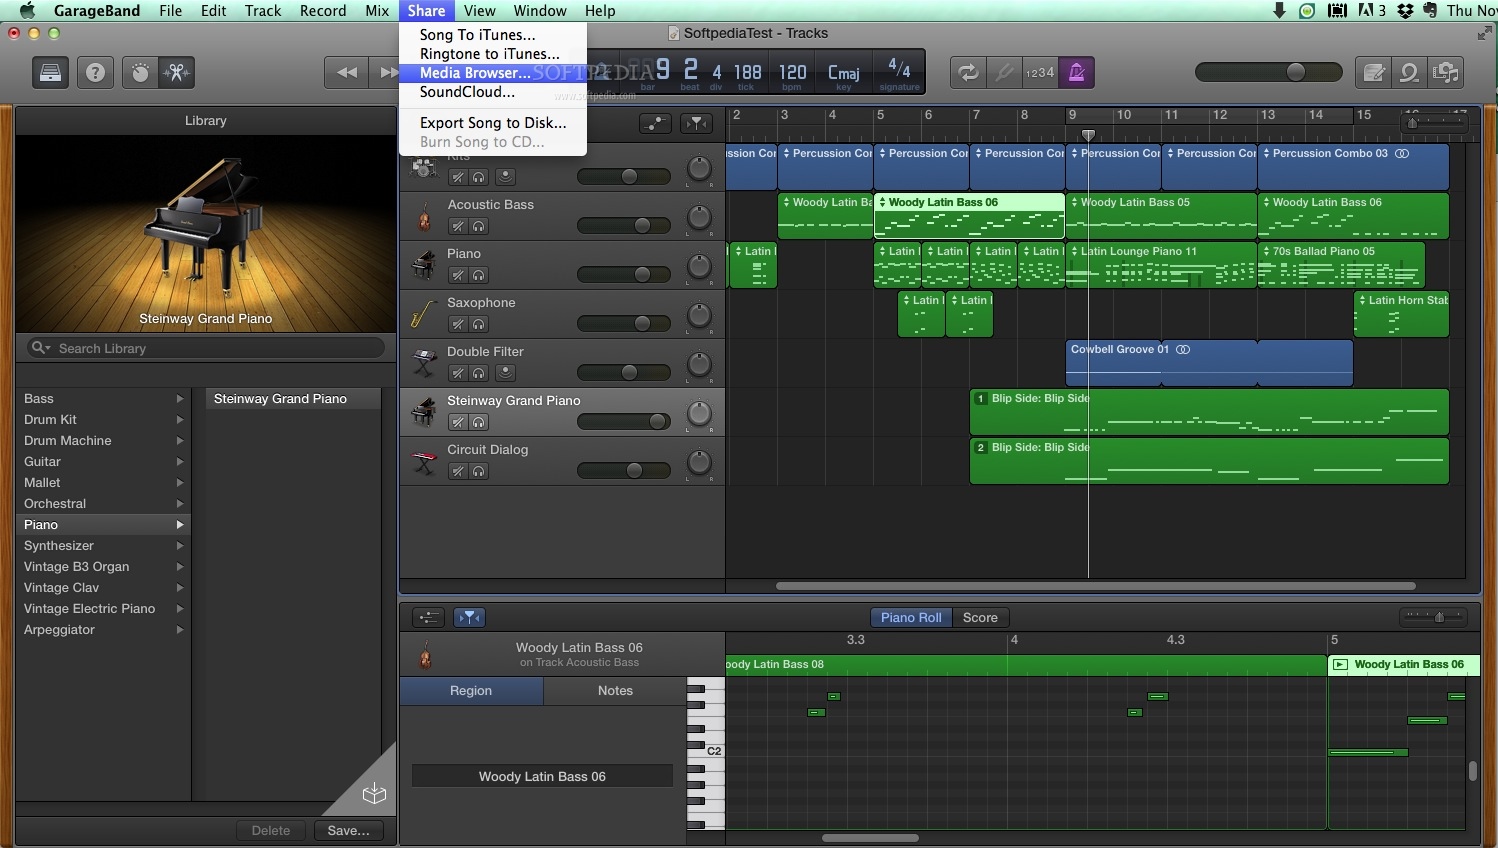 What is the latest version of garageband